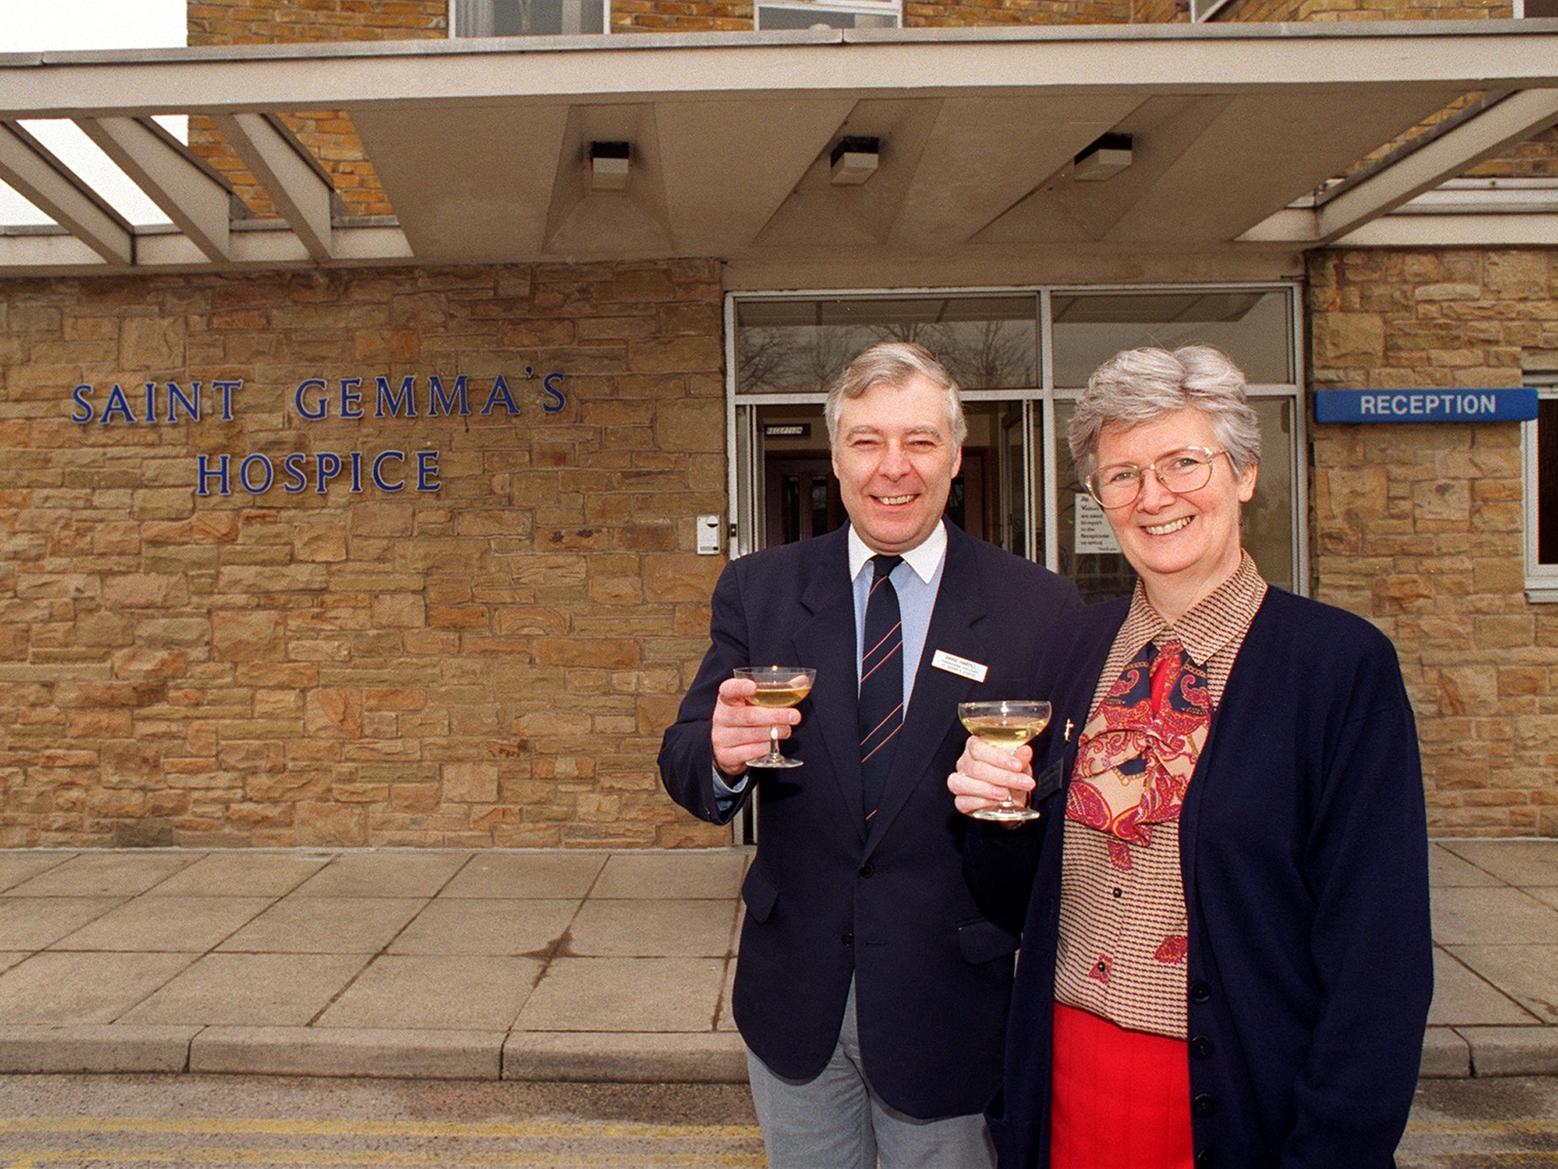 David Hartill and sister Cecilia Foley of St Gemma's Hospice raise a glass to the Half and Half Appeal which had reached one and a half million pounds.